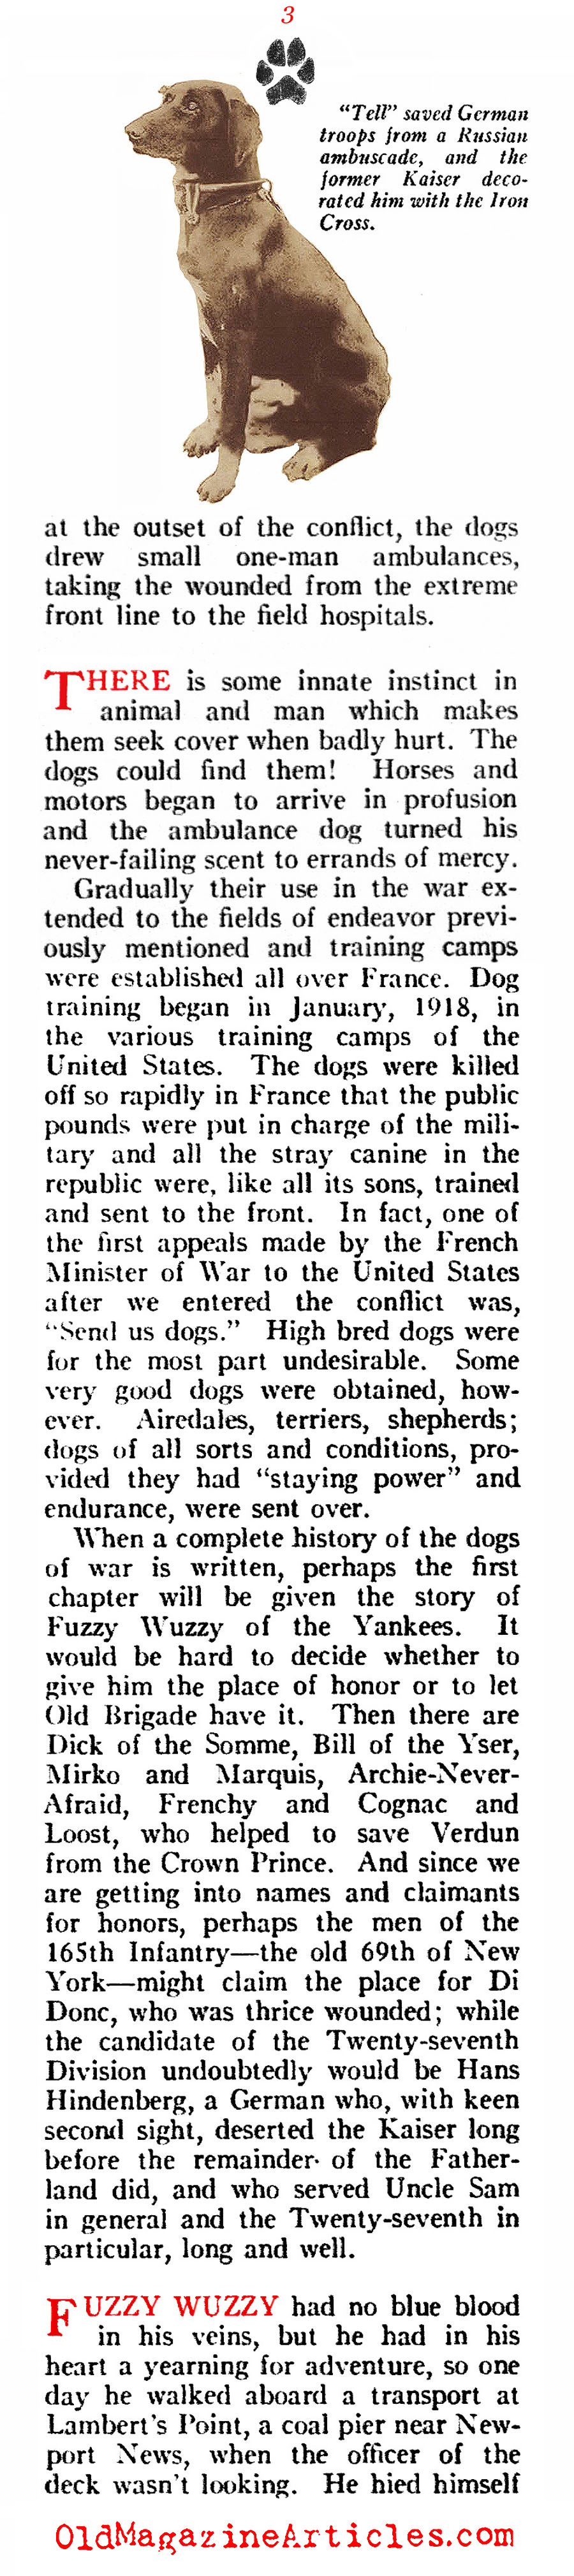 A History of Dogs in the First World War (American Legion Weekly, 1919)